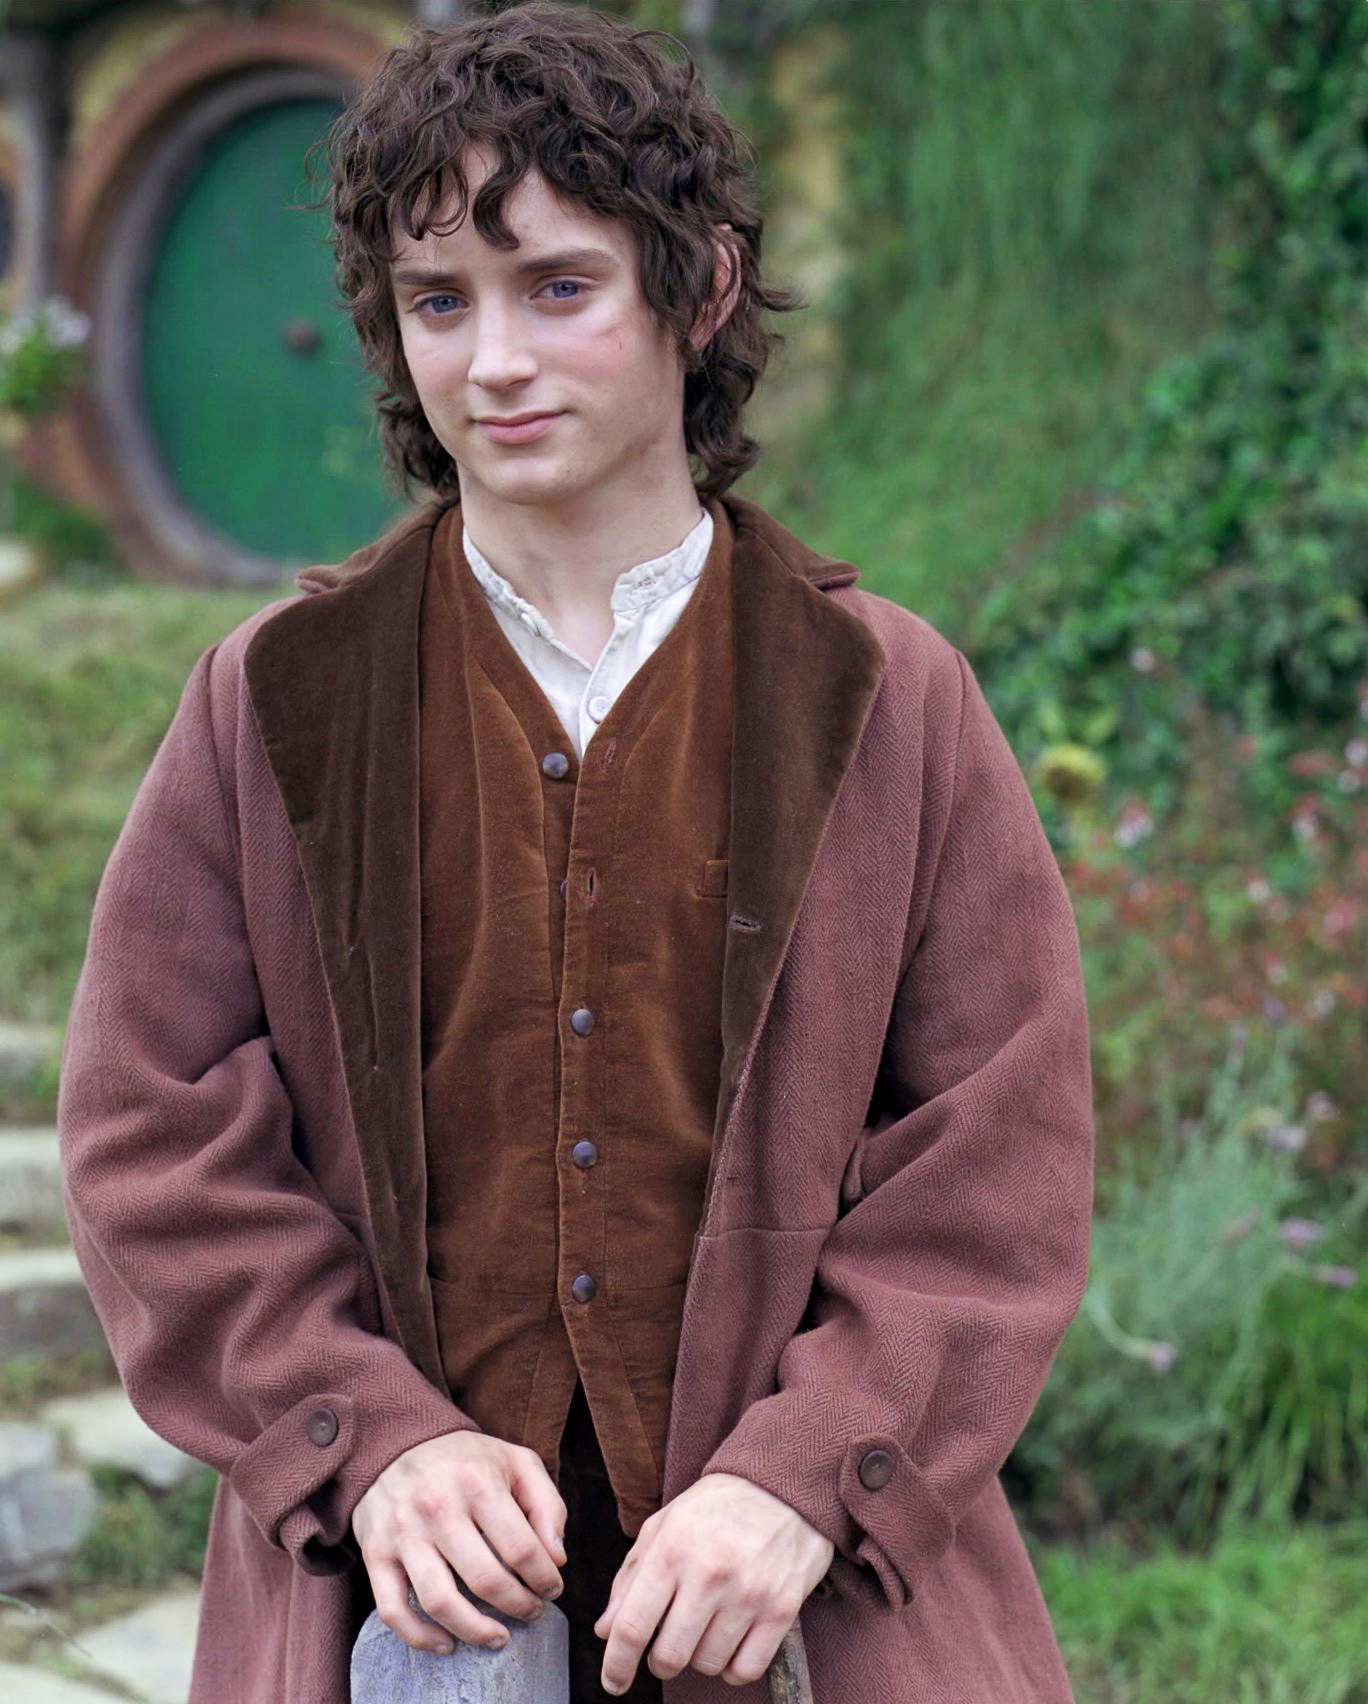 Elijah Wood filming The Lord of the Rings: The Fellowship of the Ring, 2001.